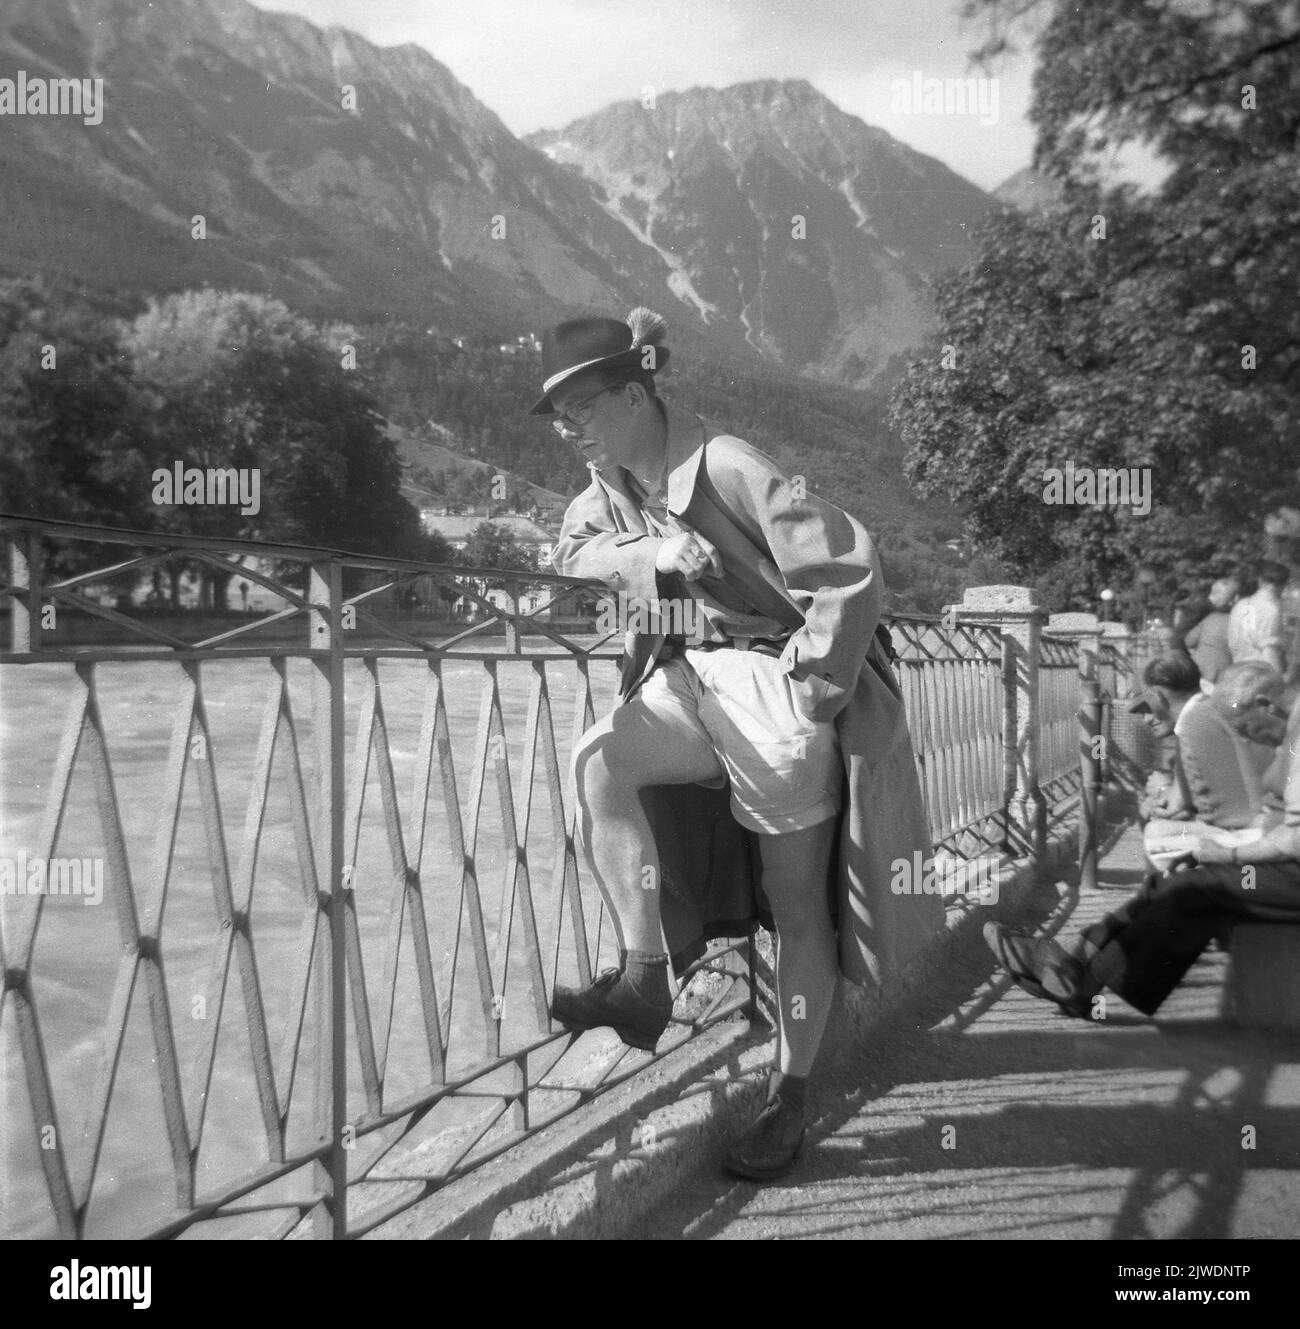 1958, historical, an English tourist in shorts, overcoat, and traditional Alpine hat with feather, standing by a barrier looking over a river in the Tryol region of Austria. The Alps in the background. Stock Photo